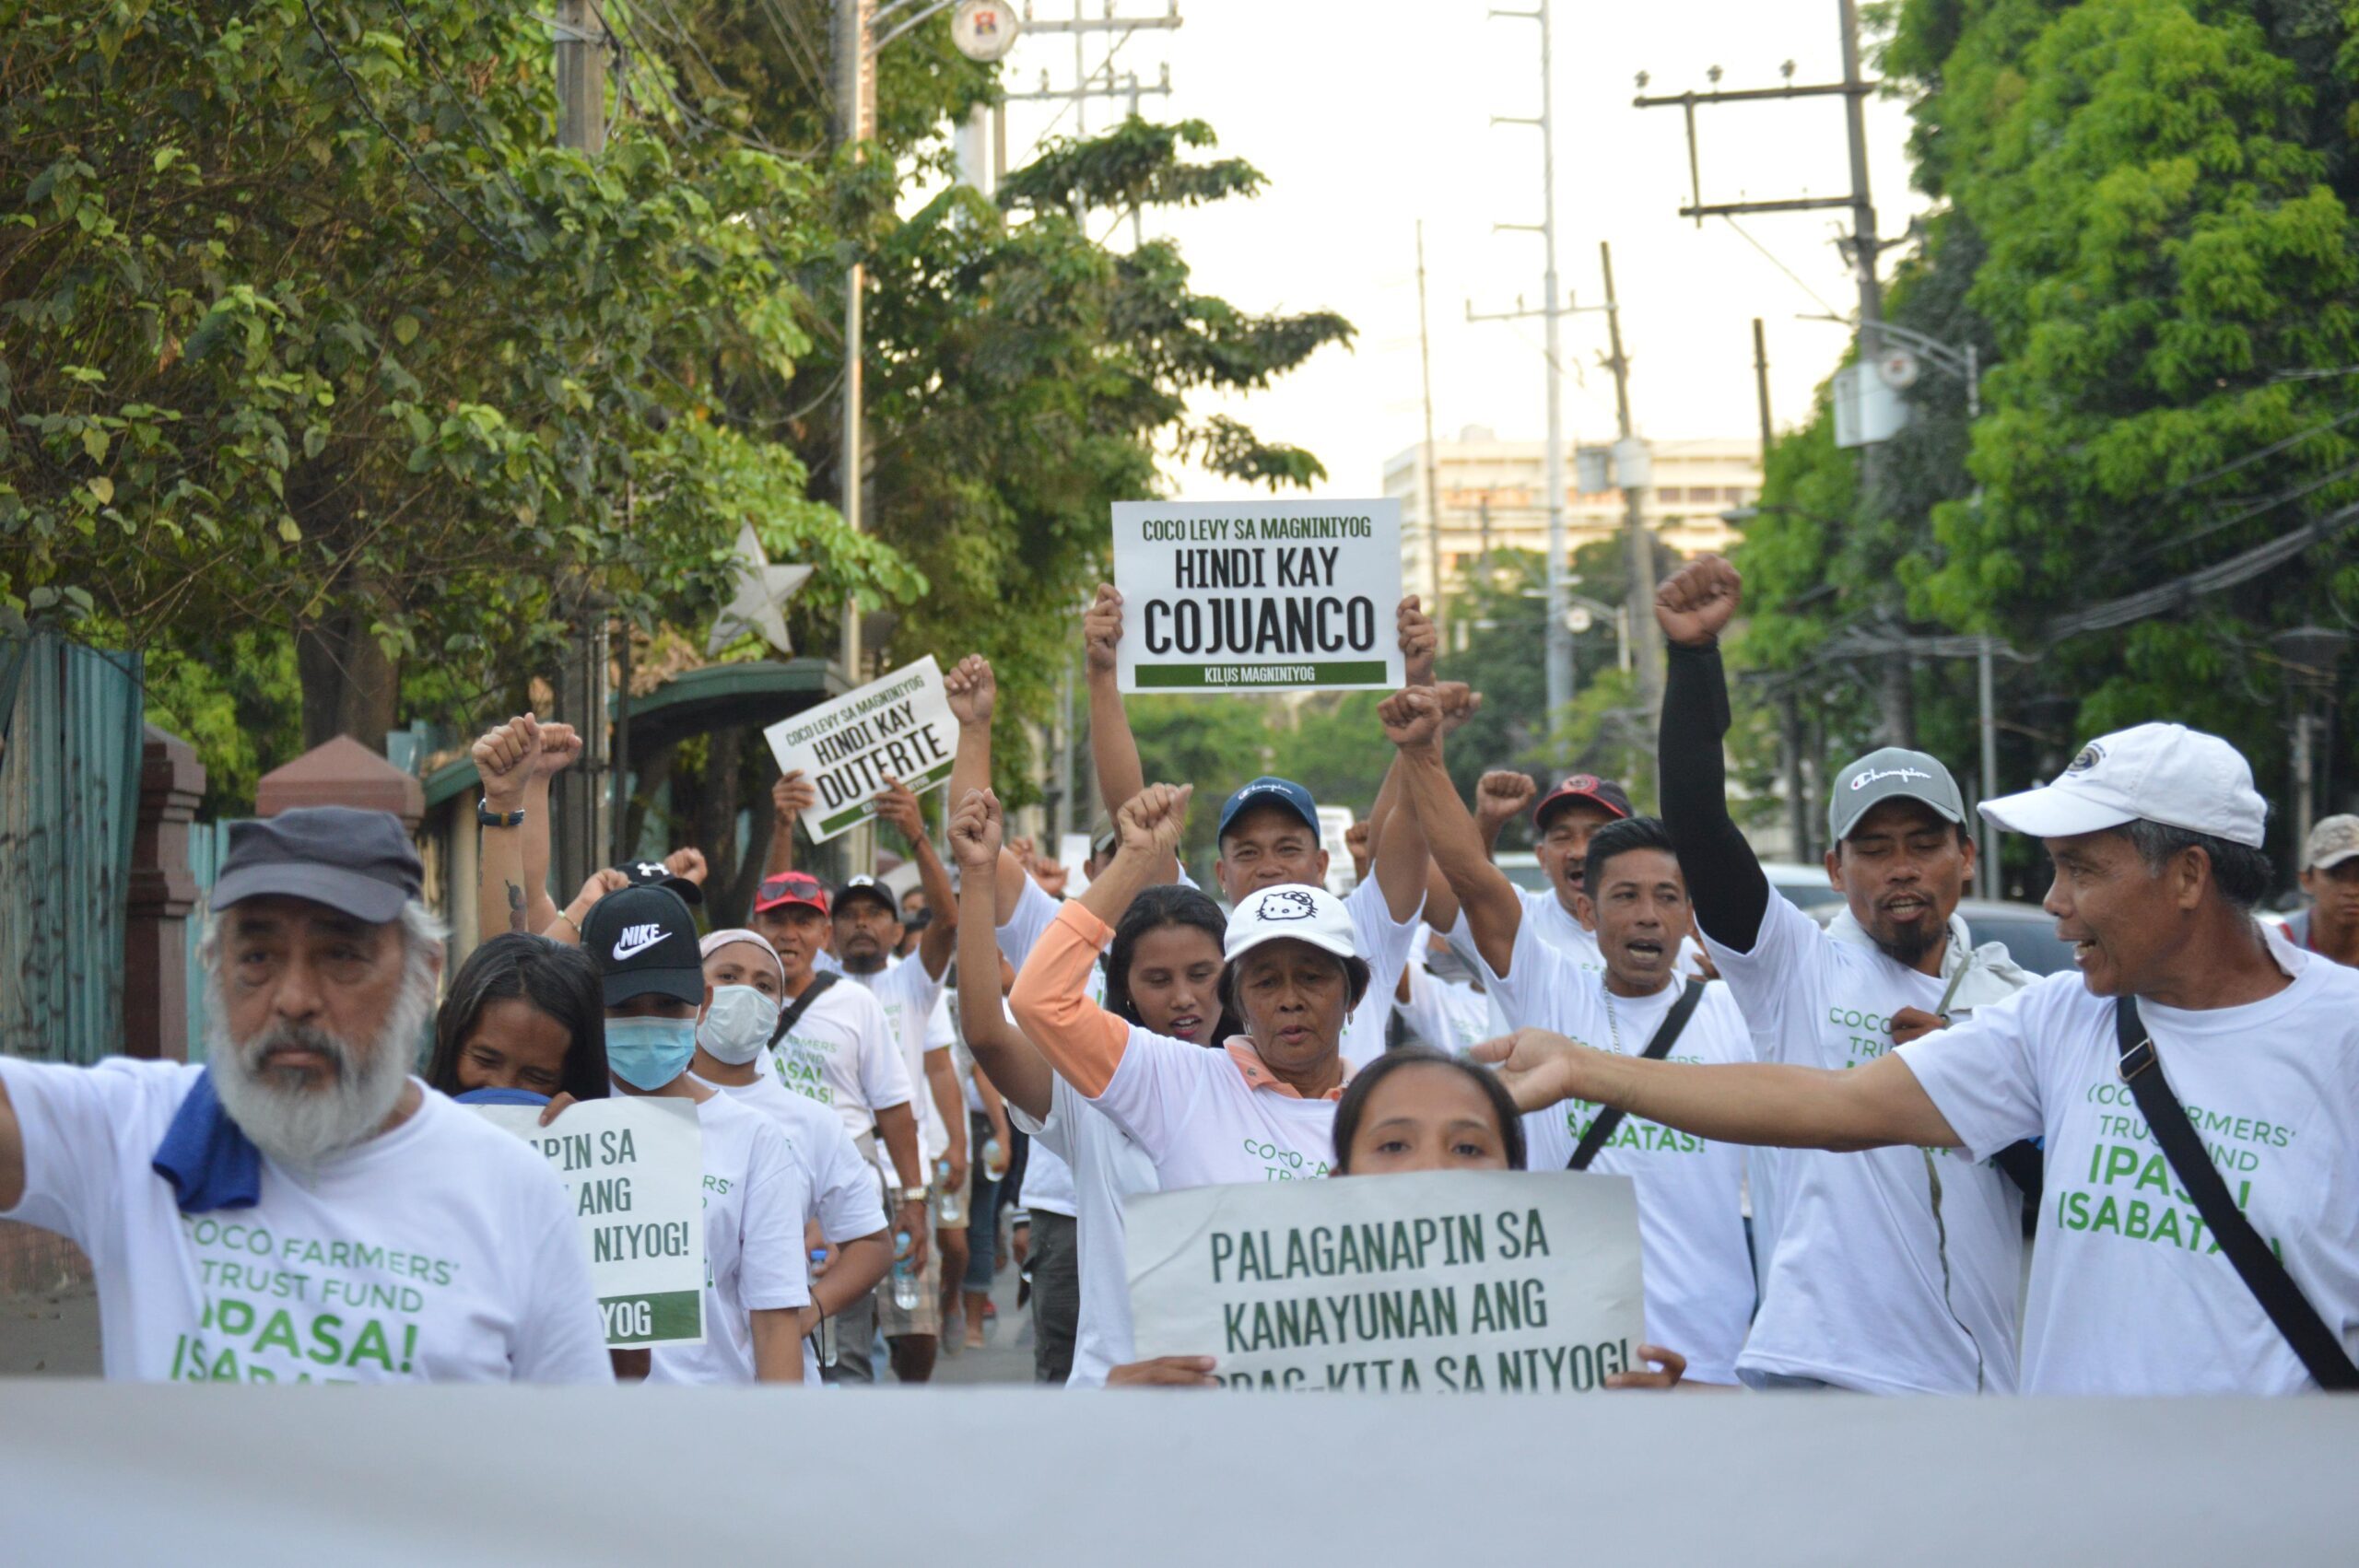 Farmers call on gov’t to stop farm struggle, pass Coconut Trust Fund